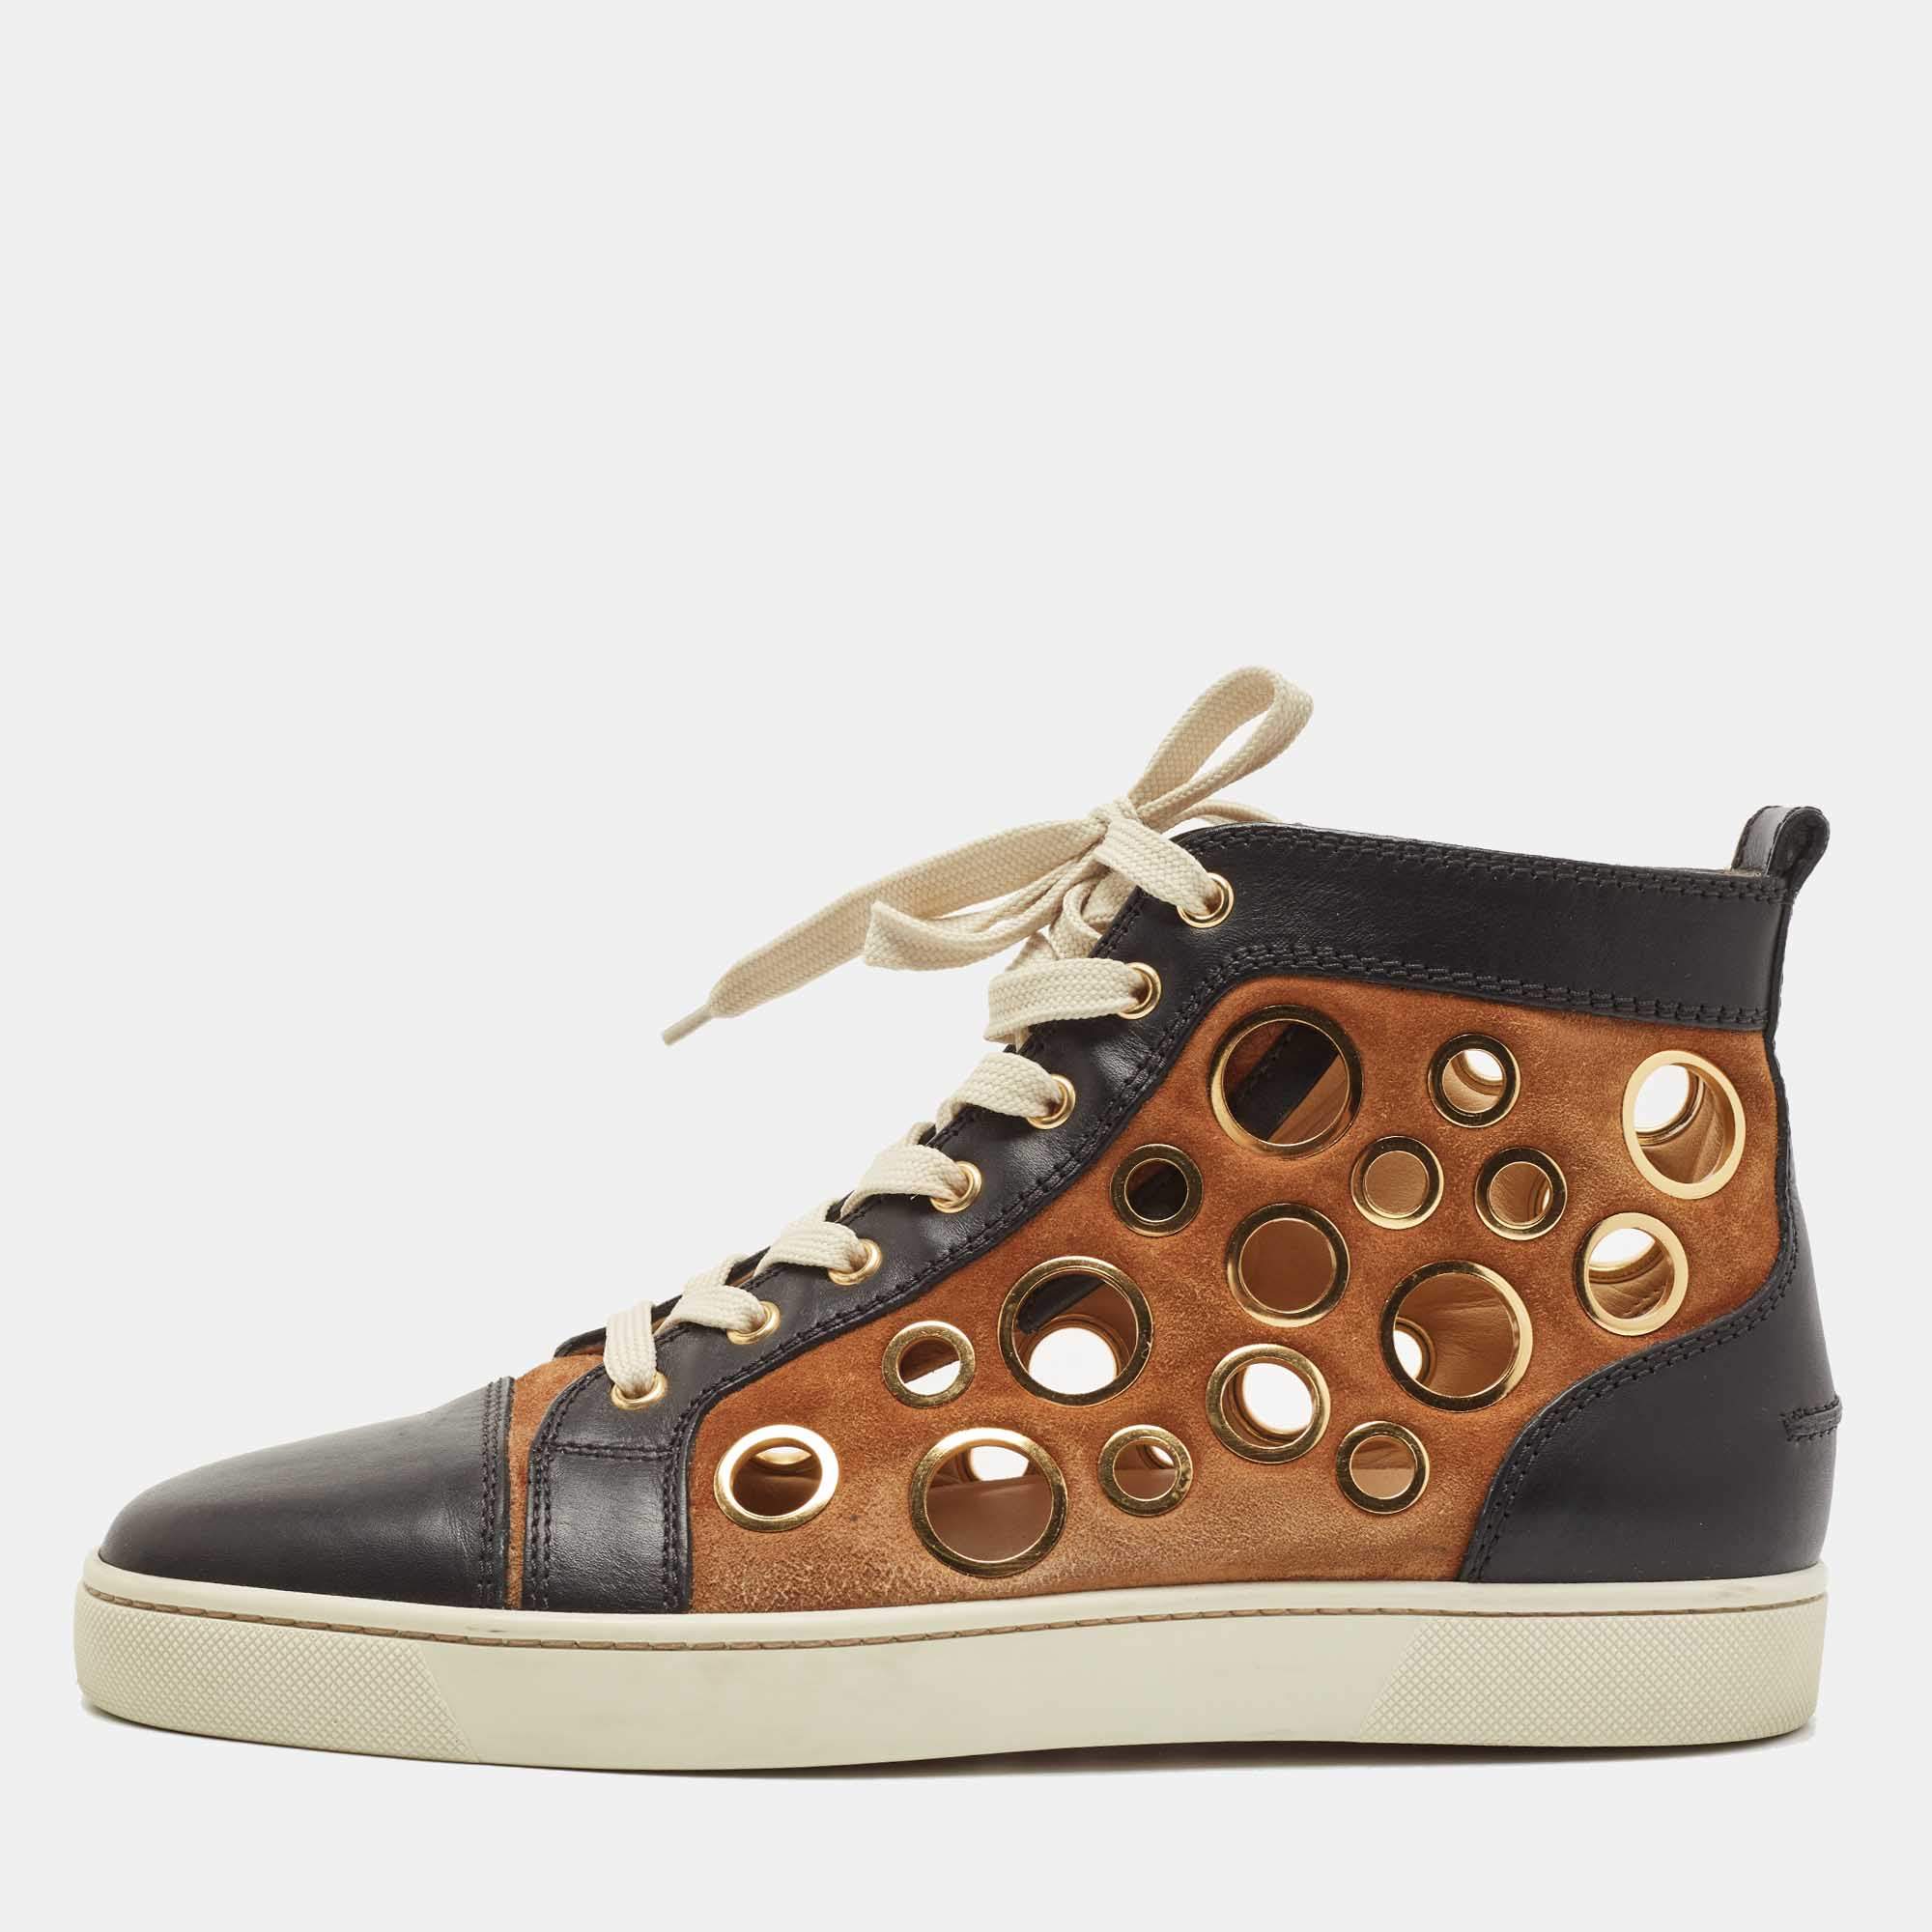 Louboutin Black/Brown Leather and Suede Cut High Top Size 42.5 Christian Louboutin | TLC